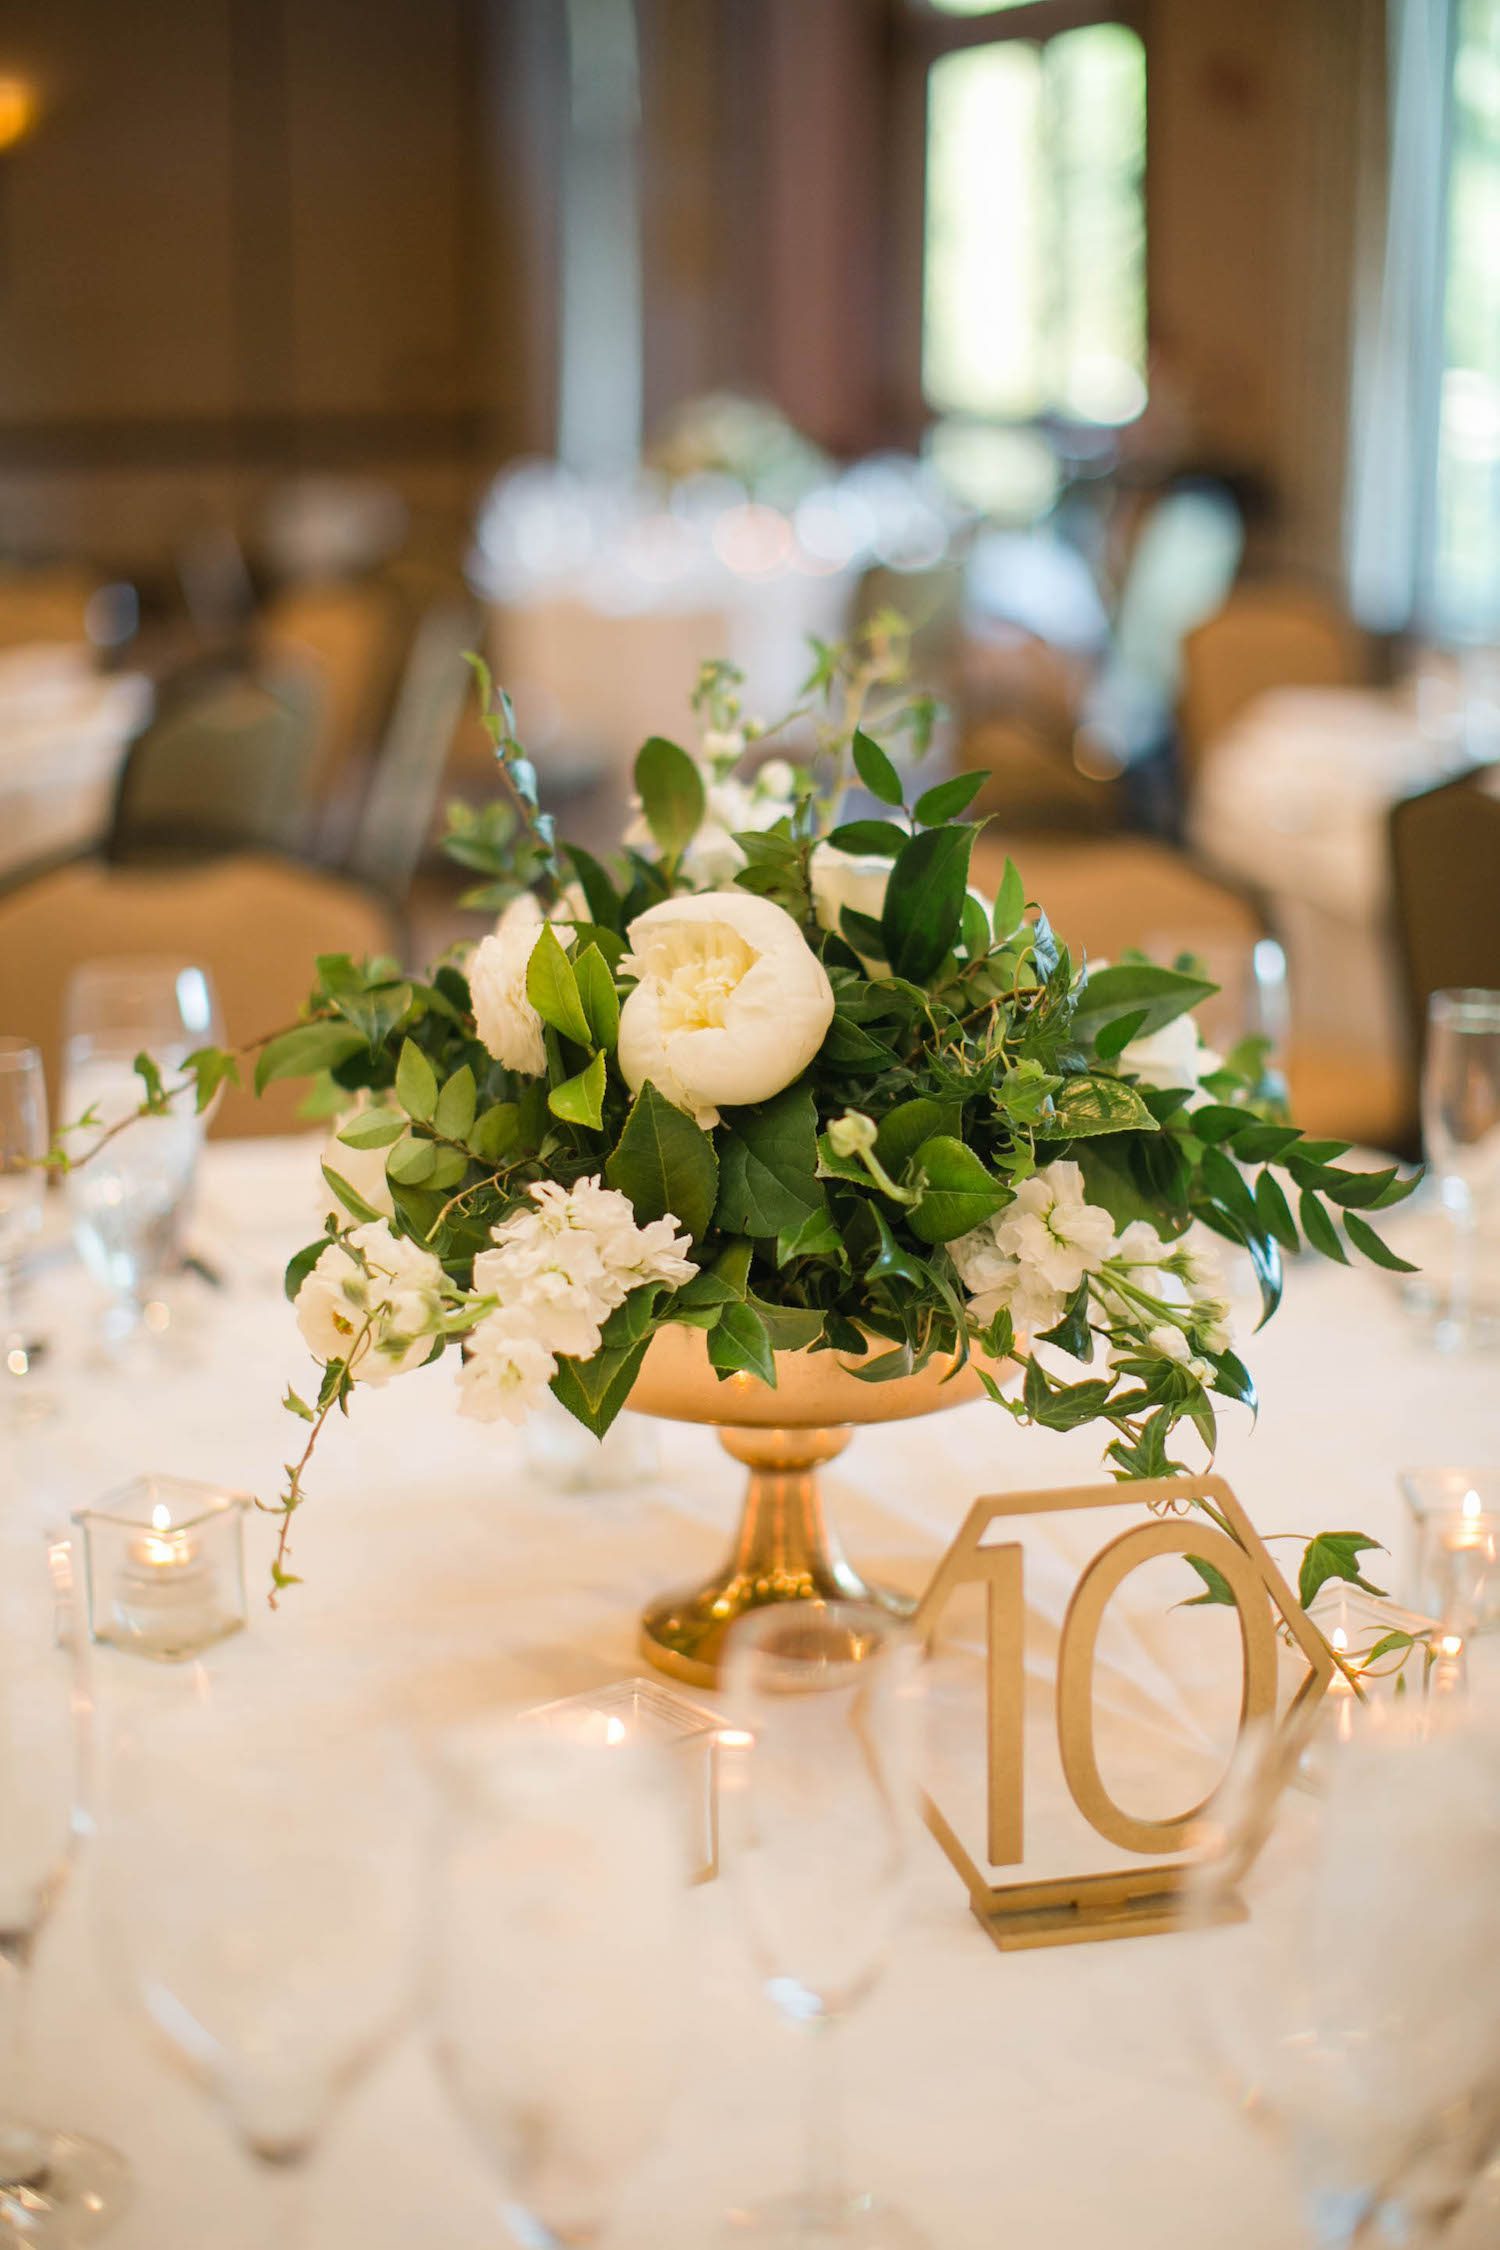 White Peony and Stock with Ruscus and Salal at Landsdowne Resort and Spa in Loudoun County, Virginia. Photograph by Kristen Gardner Photography.